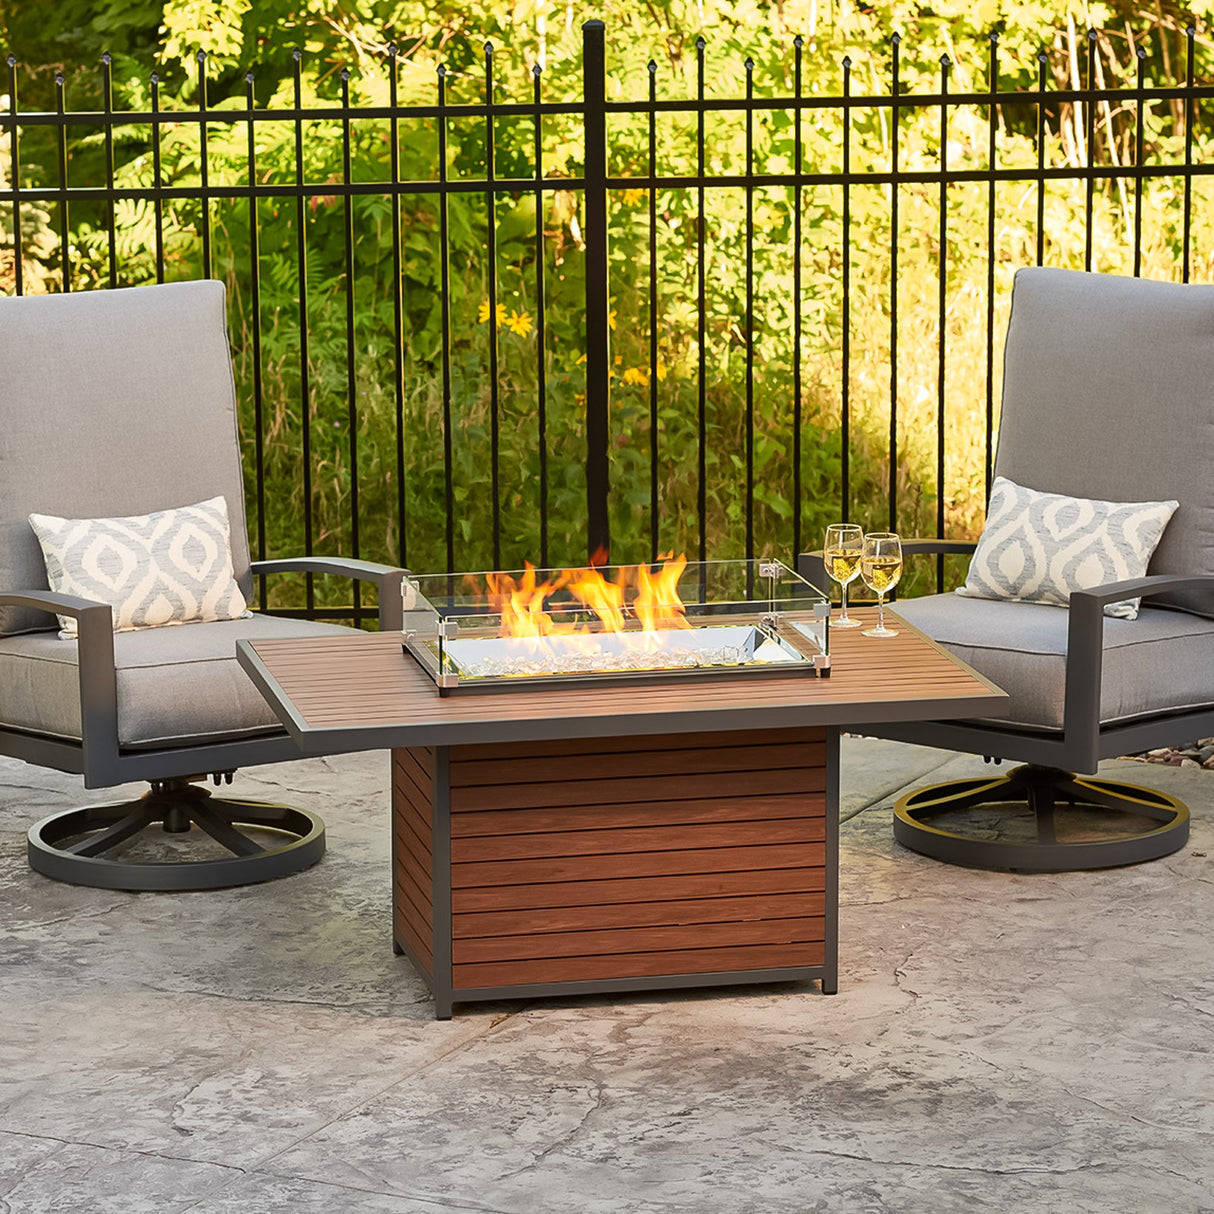 The Kenwood Rectangular Chat Height Gas Fire Pit Table in an outdoor space with lounge chairs